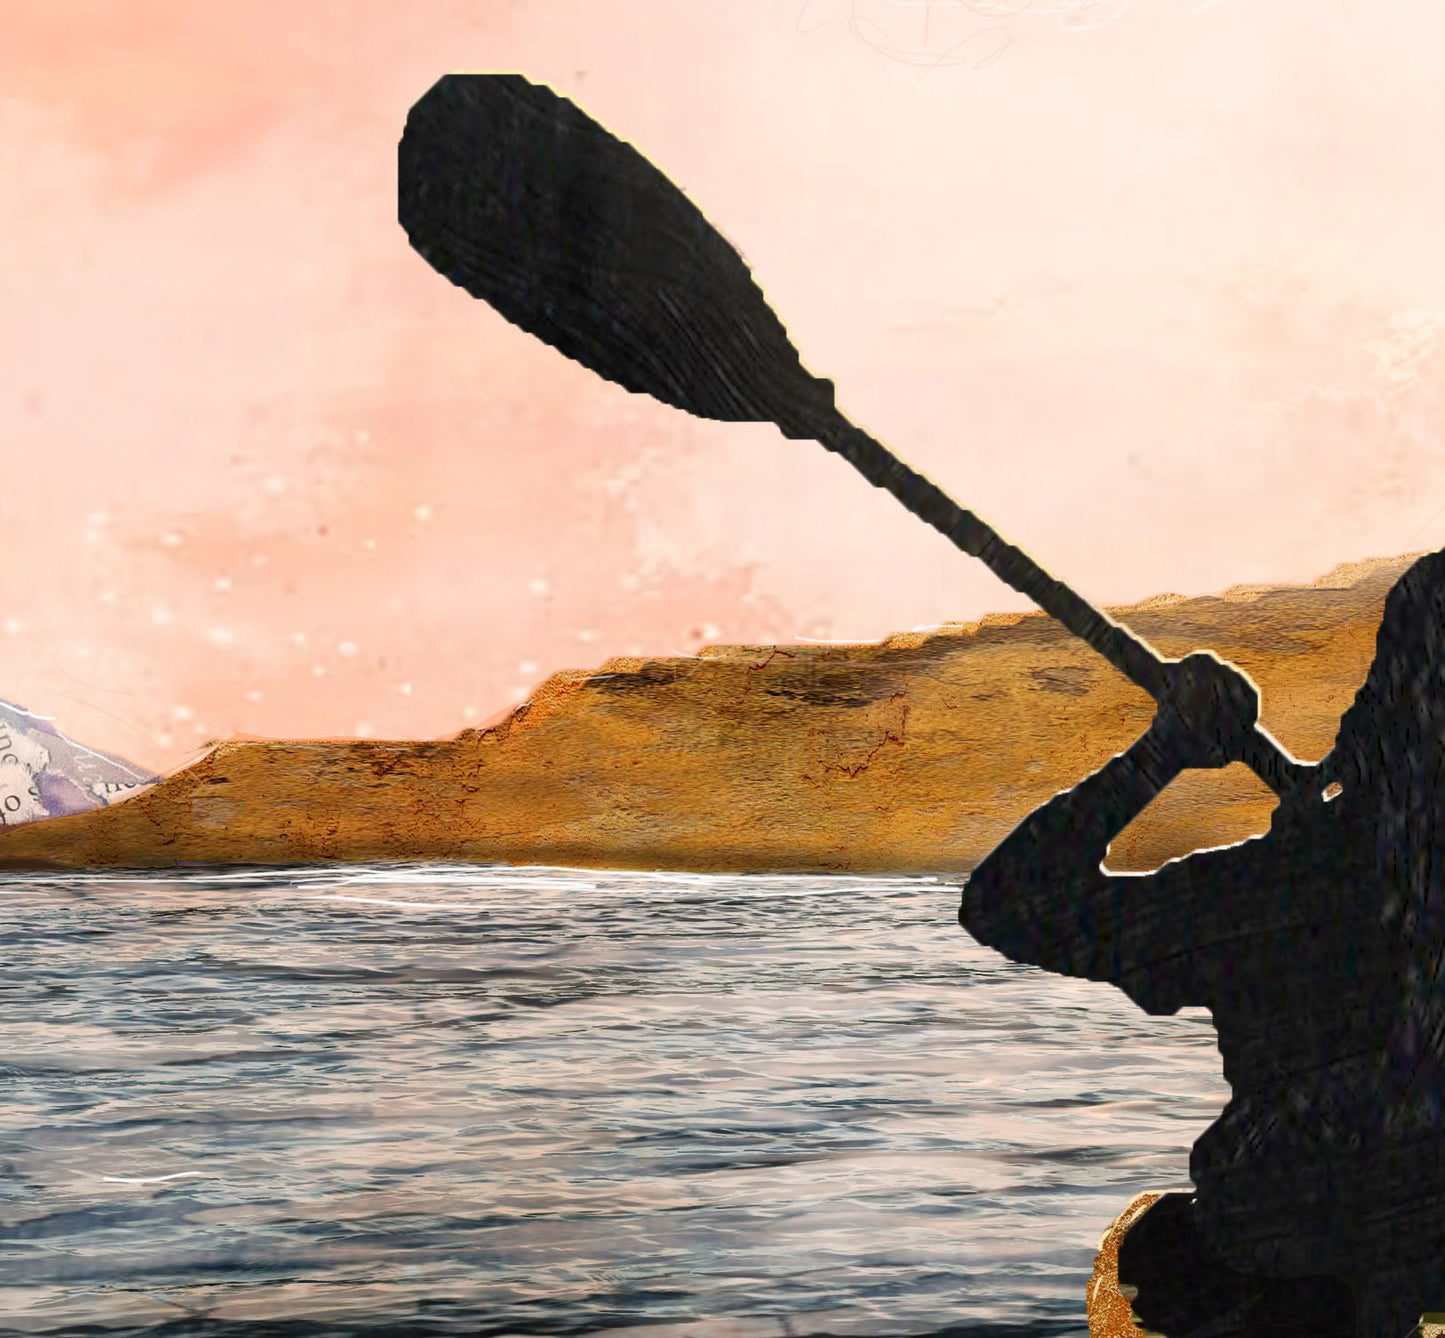 Greeting Card of a mixed media collage of a person kayaking on the Columbia River with Mt Hood near Hood River, Oregon - Blank Inside